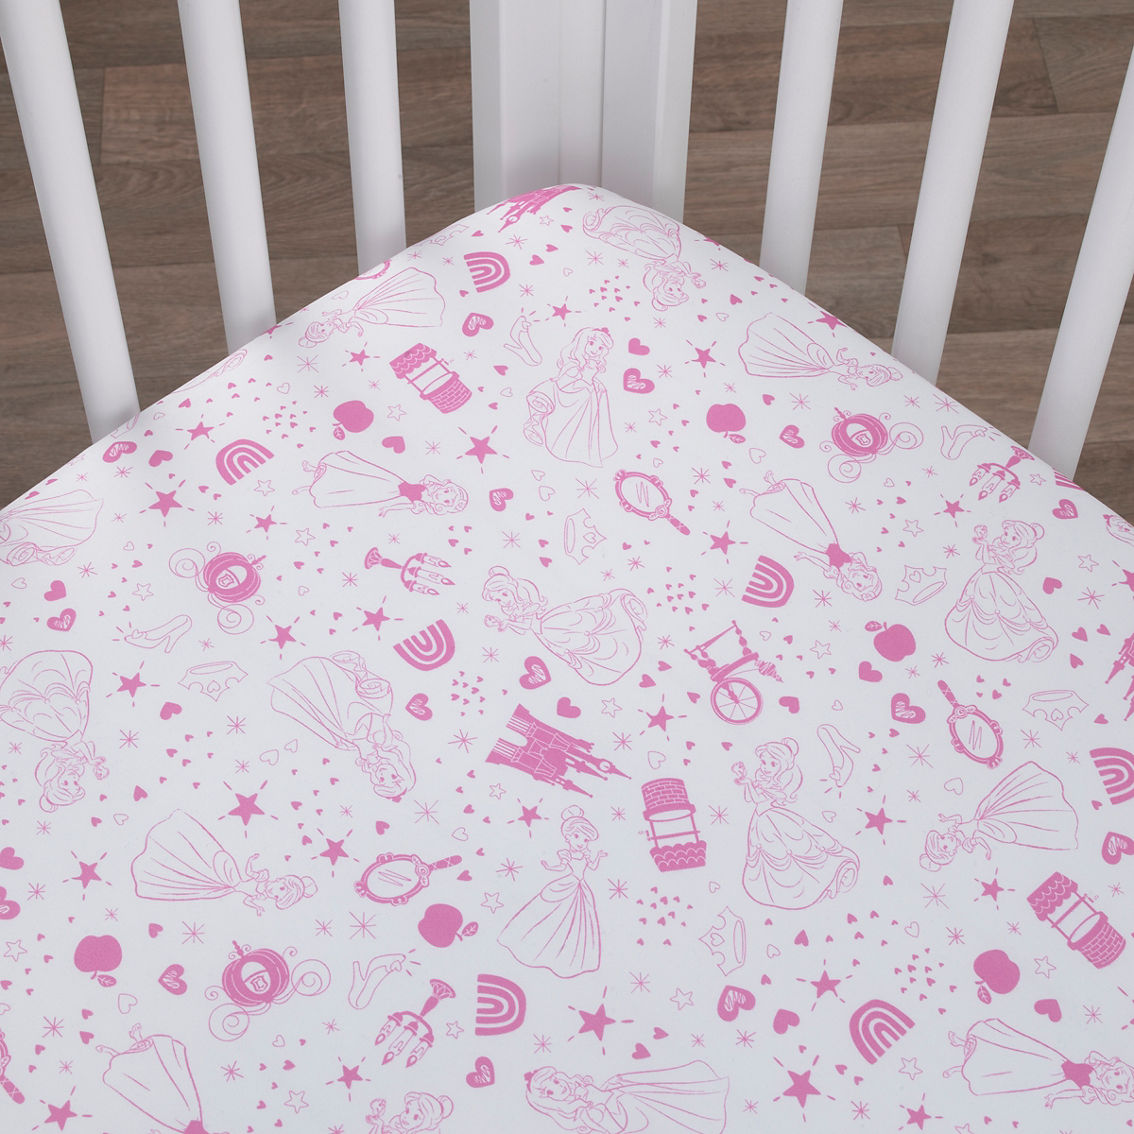 Disney Princess Dare to Dream Castle, Hearts and Stars Fitted Crib Sheet - Image 3 of 4